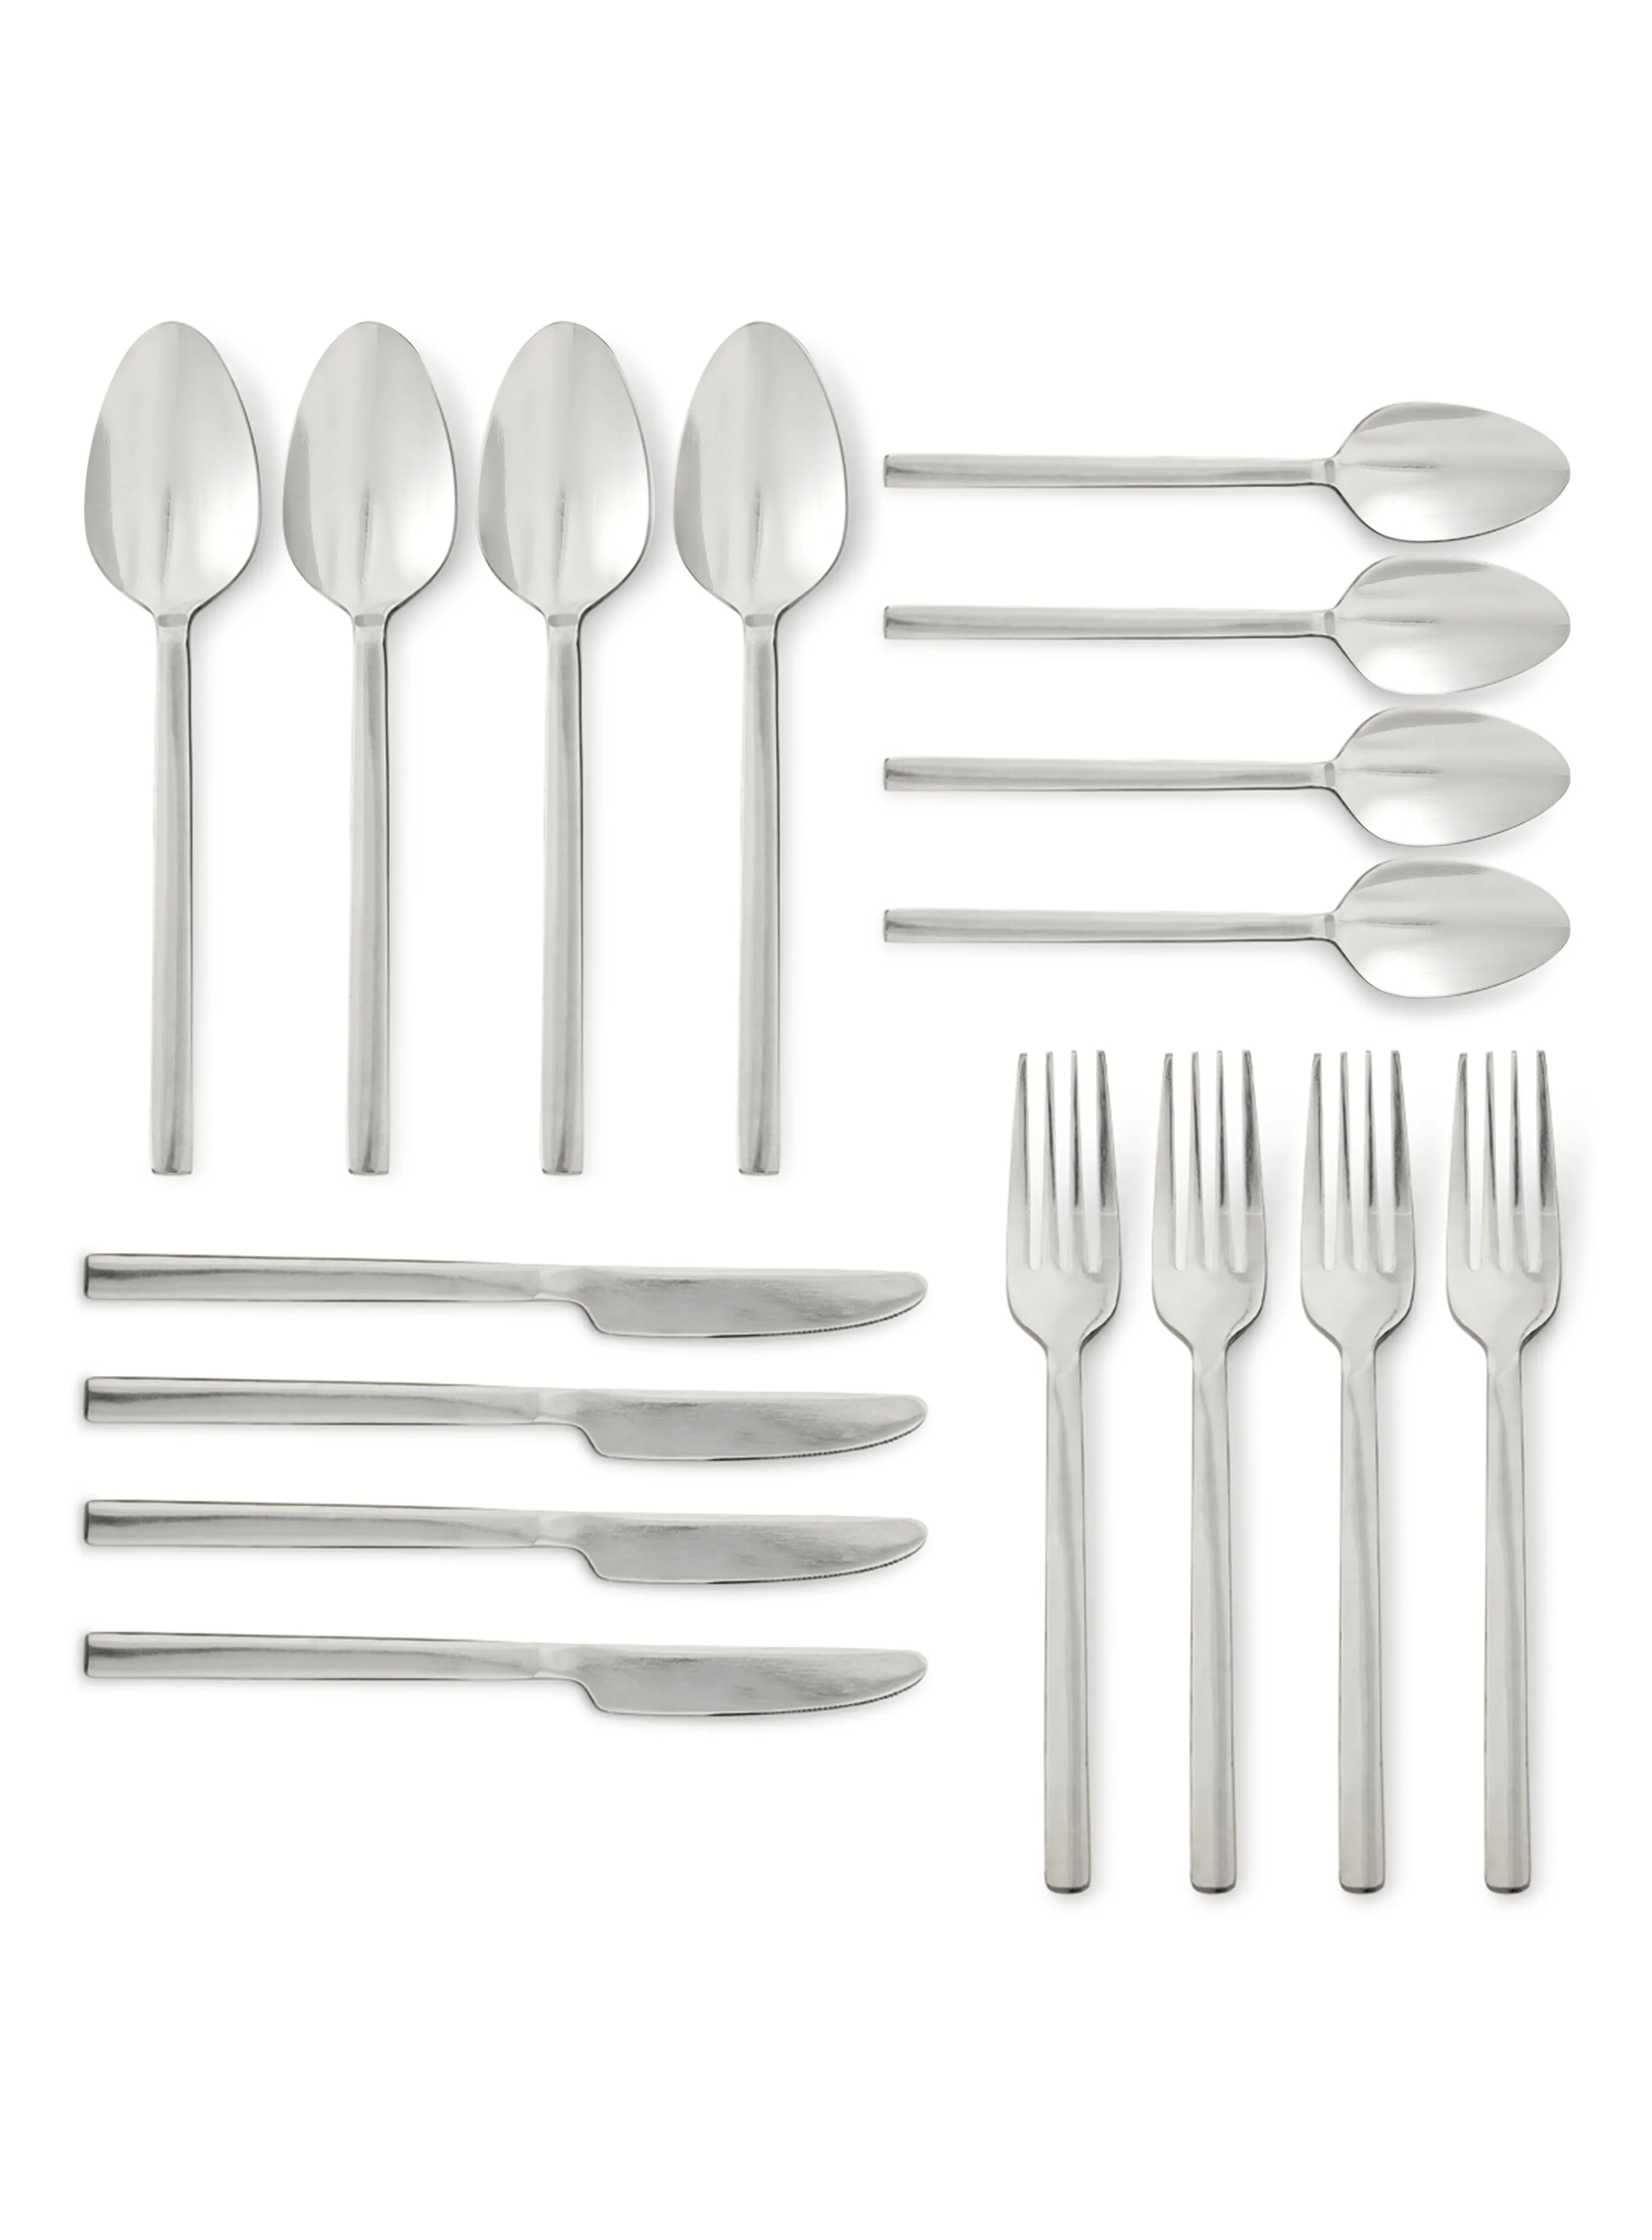 noon east 16 Piece Cutlery Set - Made Of Stainless Steel - Silverware Flatware - Spoons And Forks Set, Spoon Set - Table Spoons, Tea Spoons, Forks, Knives - Serves 4 - Design Silver Lyra